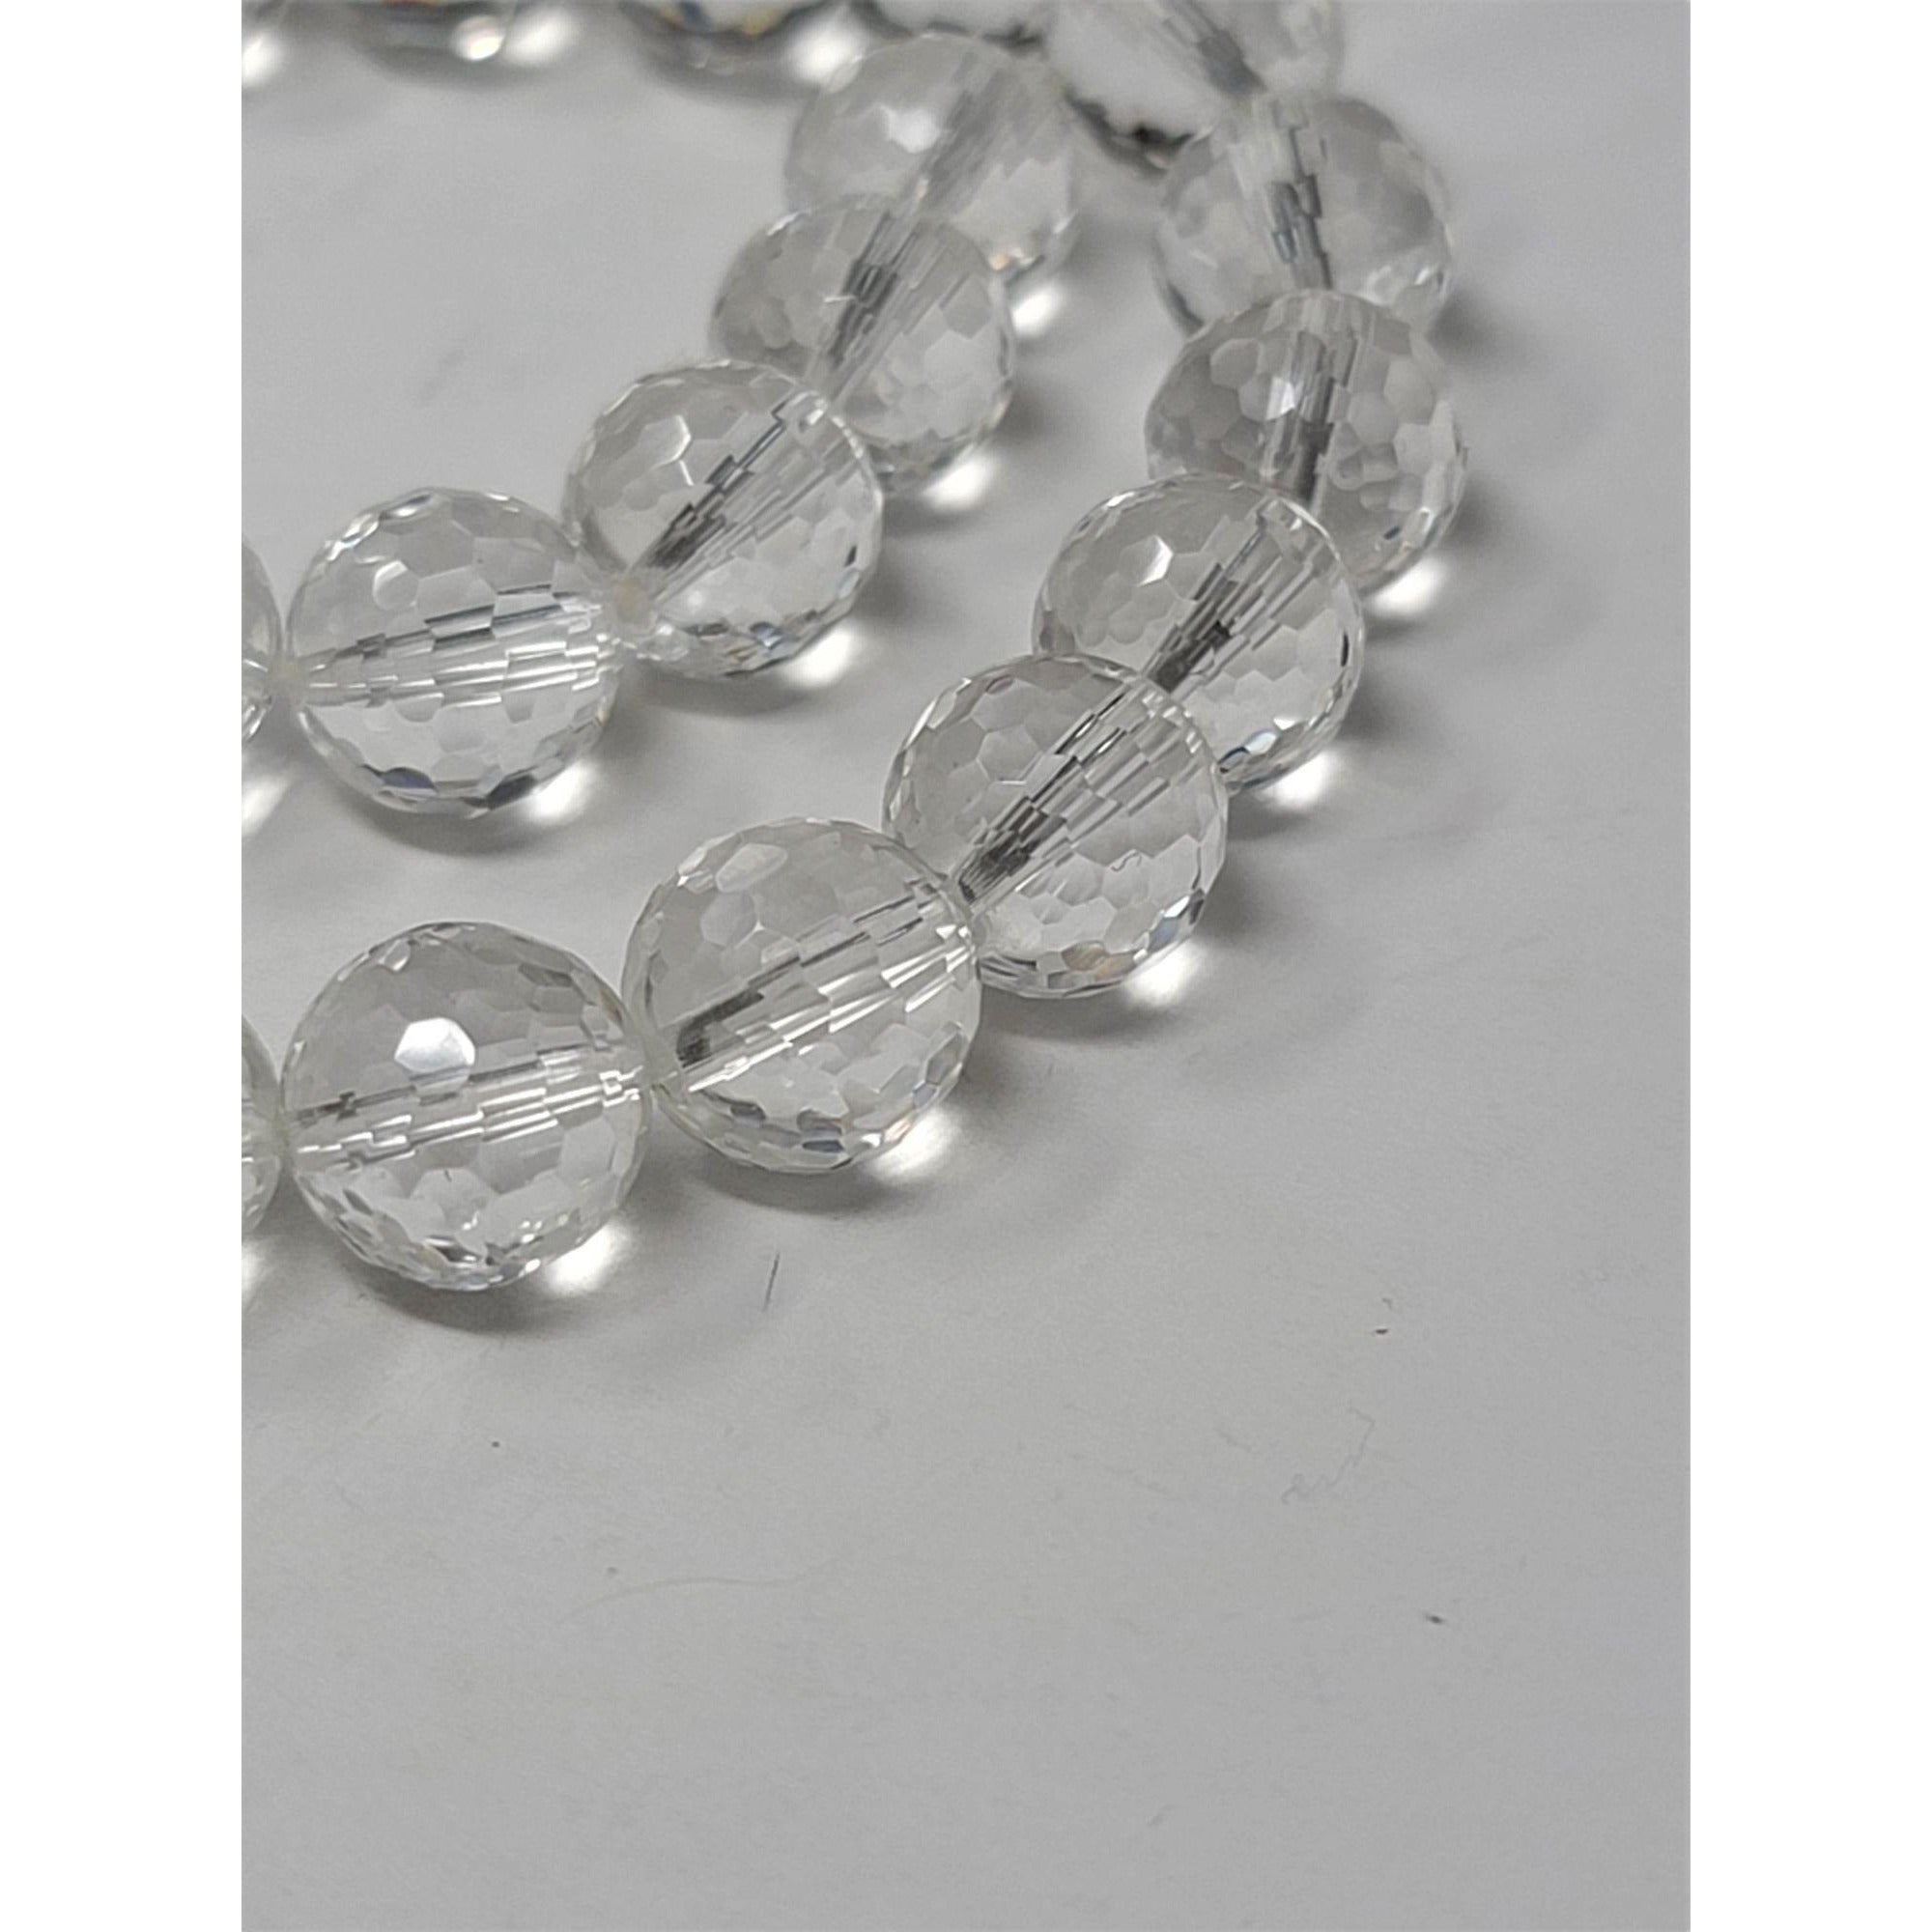 Rock Crystal Quartz Faceted Round Beads 10 mm